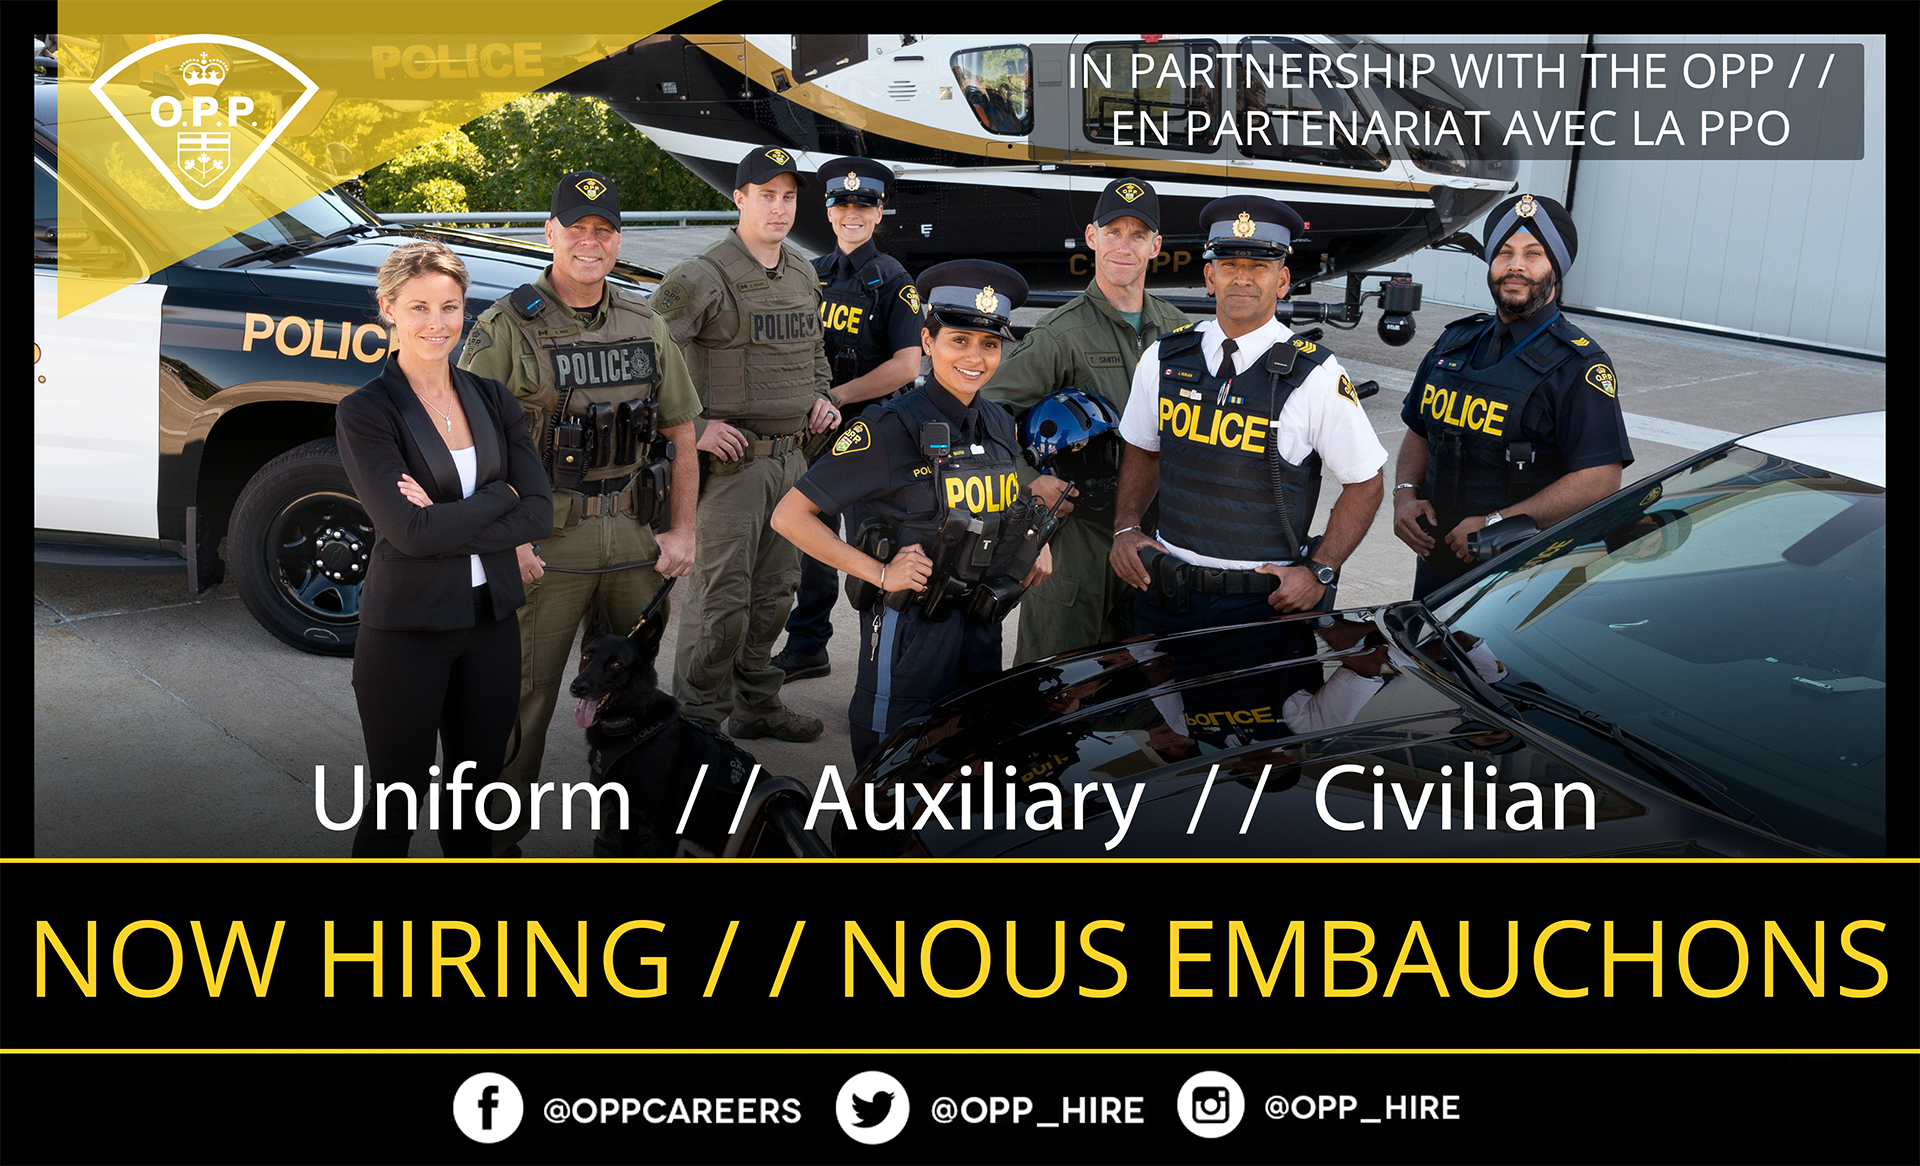 In partnership with the OPP / Now Hiring